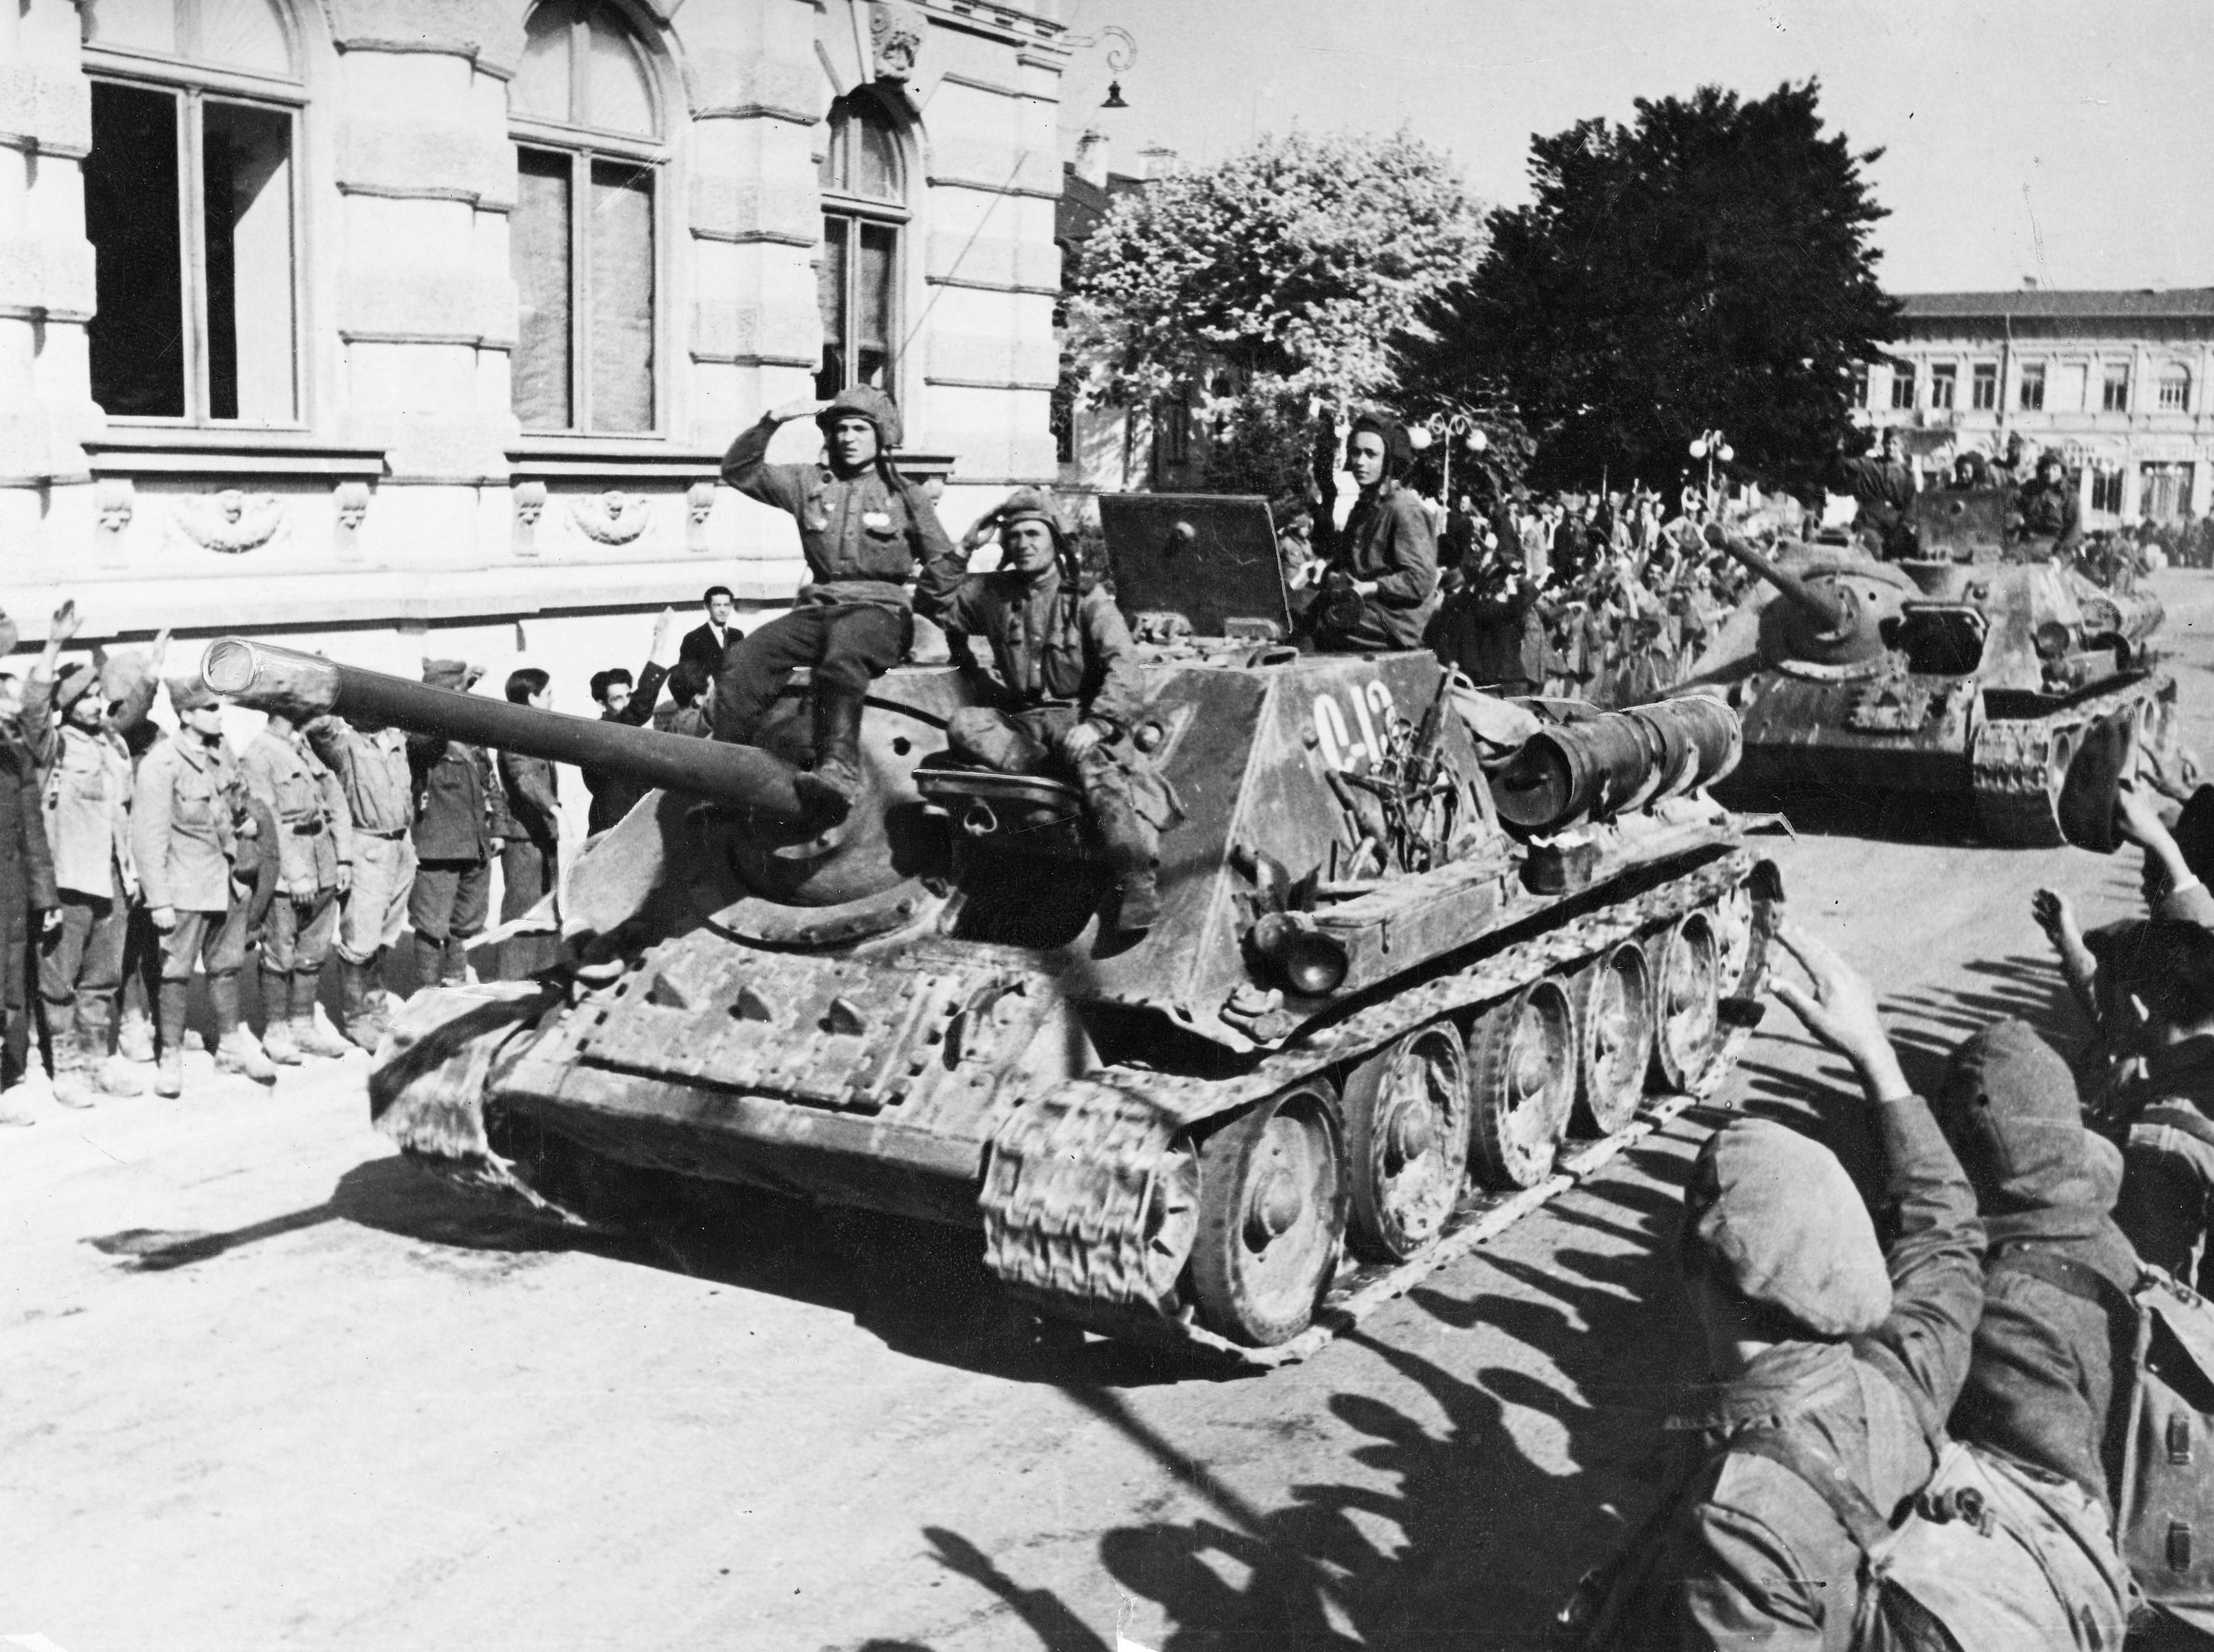 The Red Army enters Bucharest in 1944 during War World II